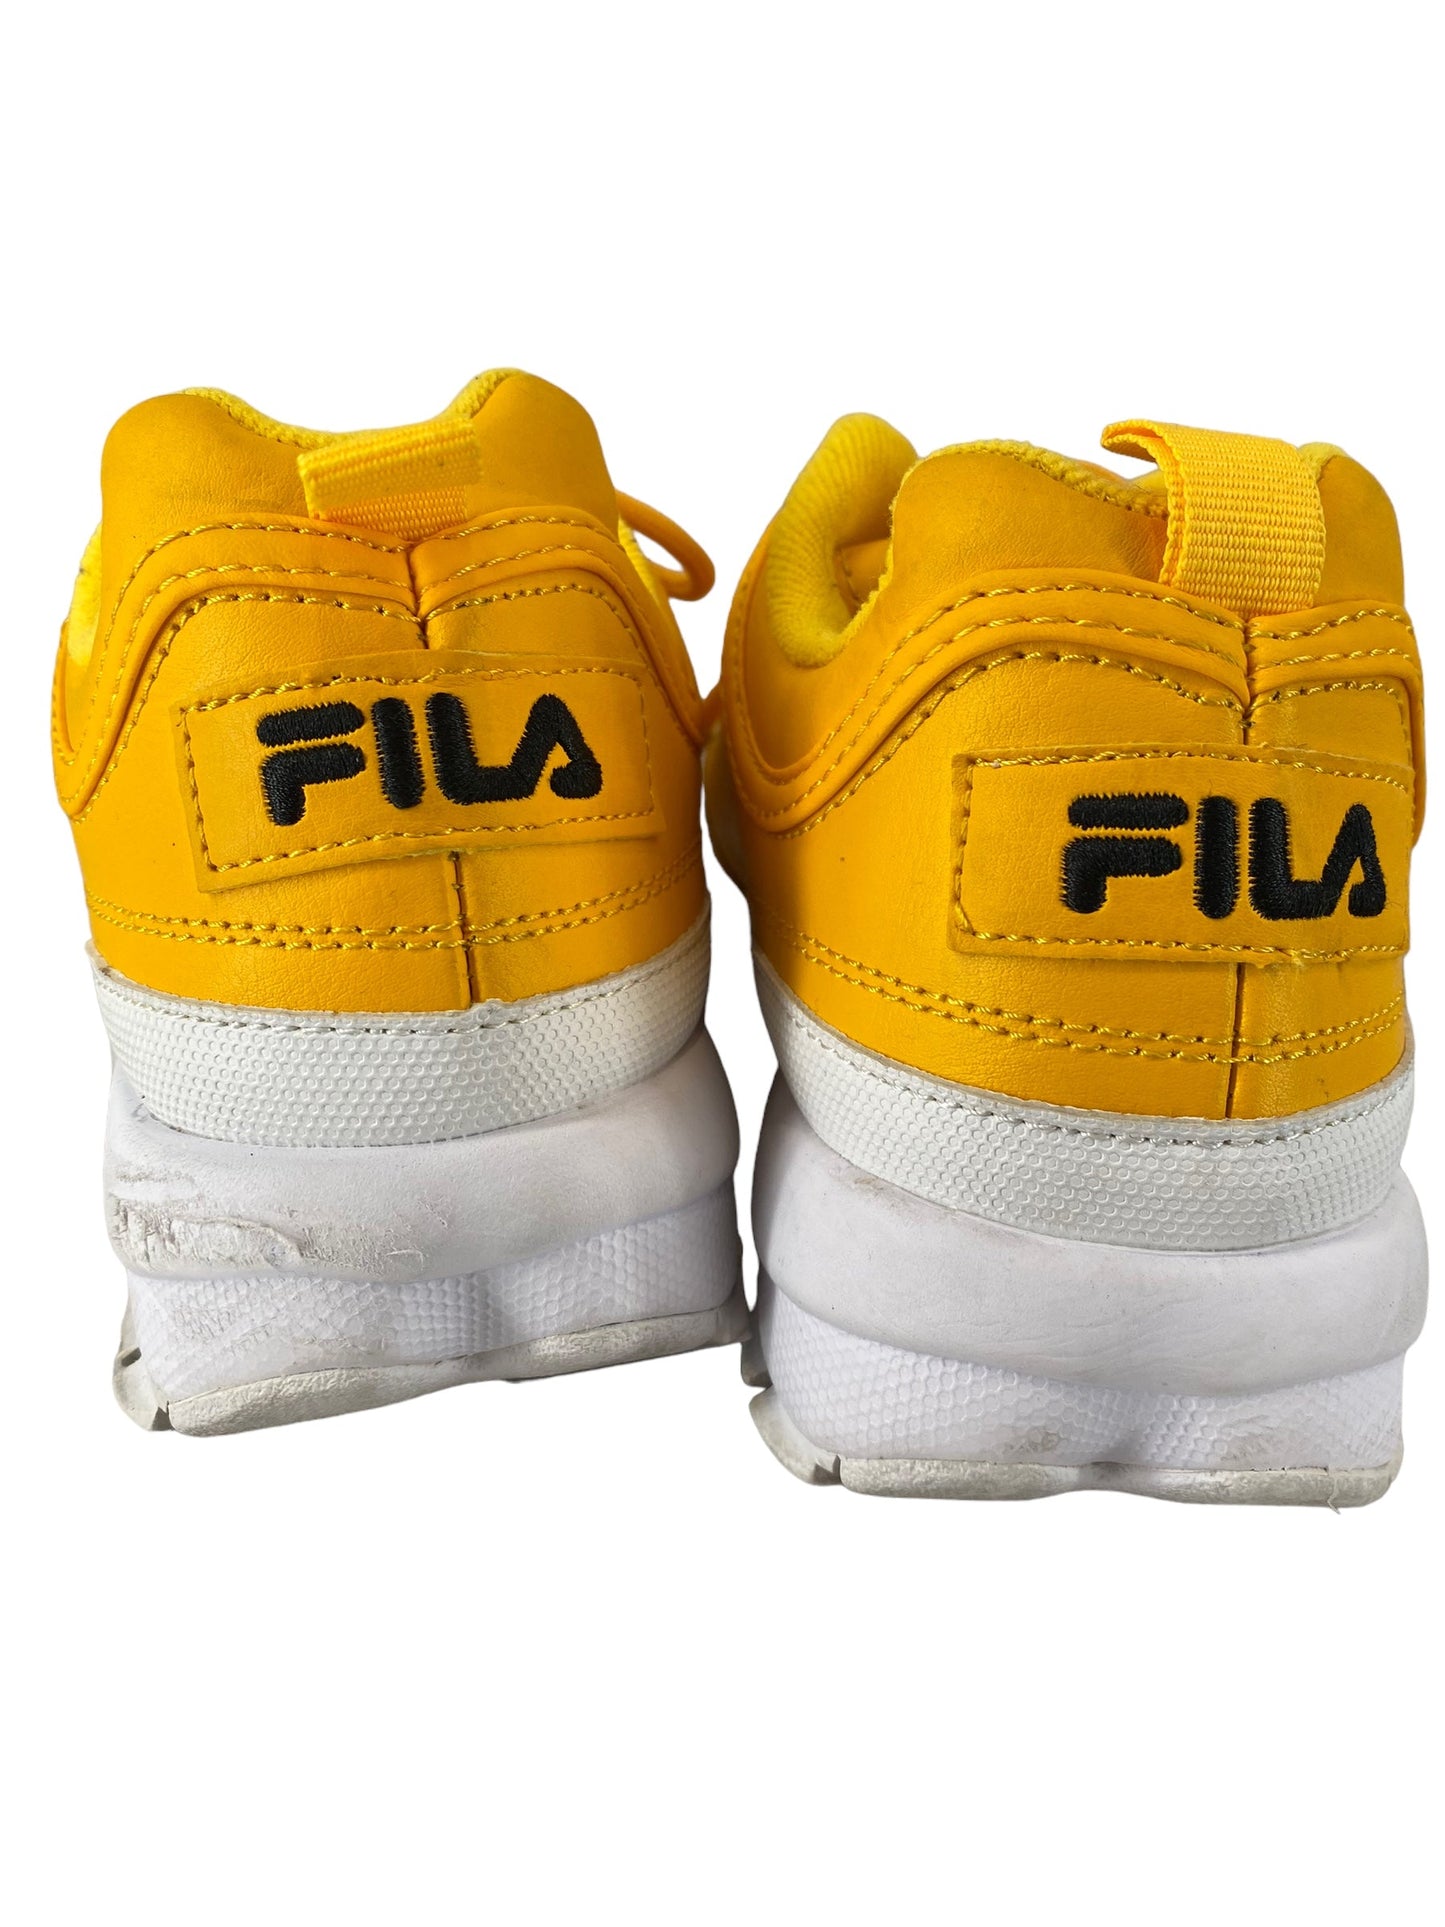 Shoes Sneakers By Fila  Size: 8.5